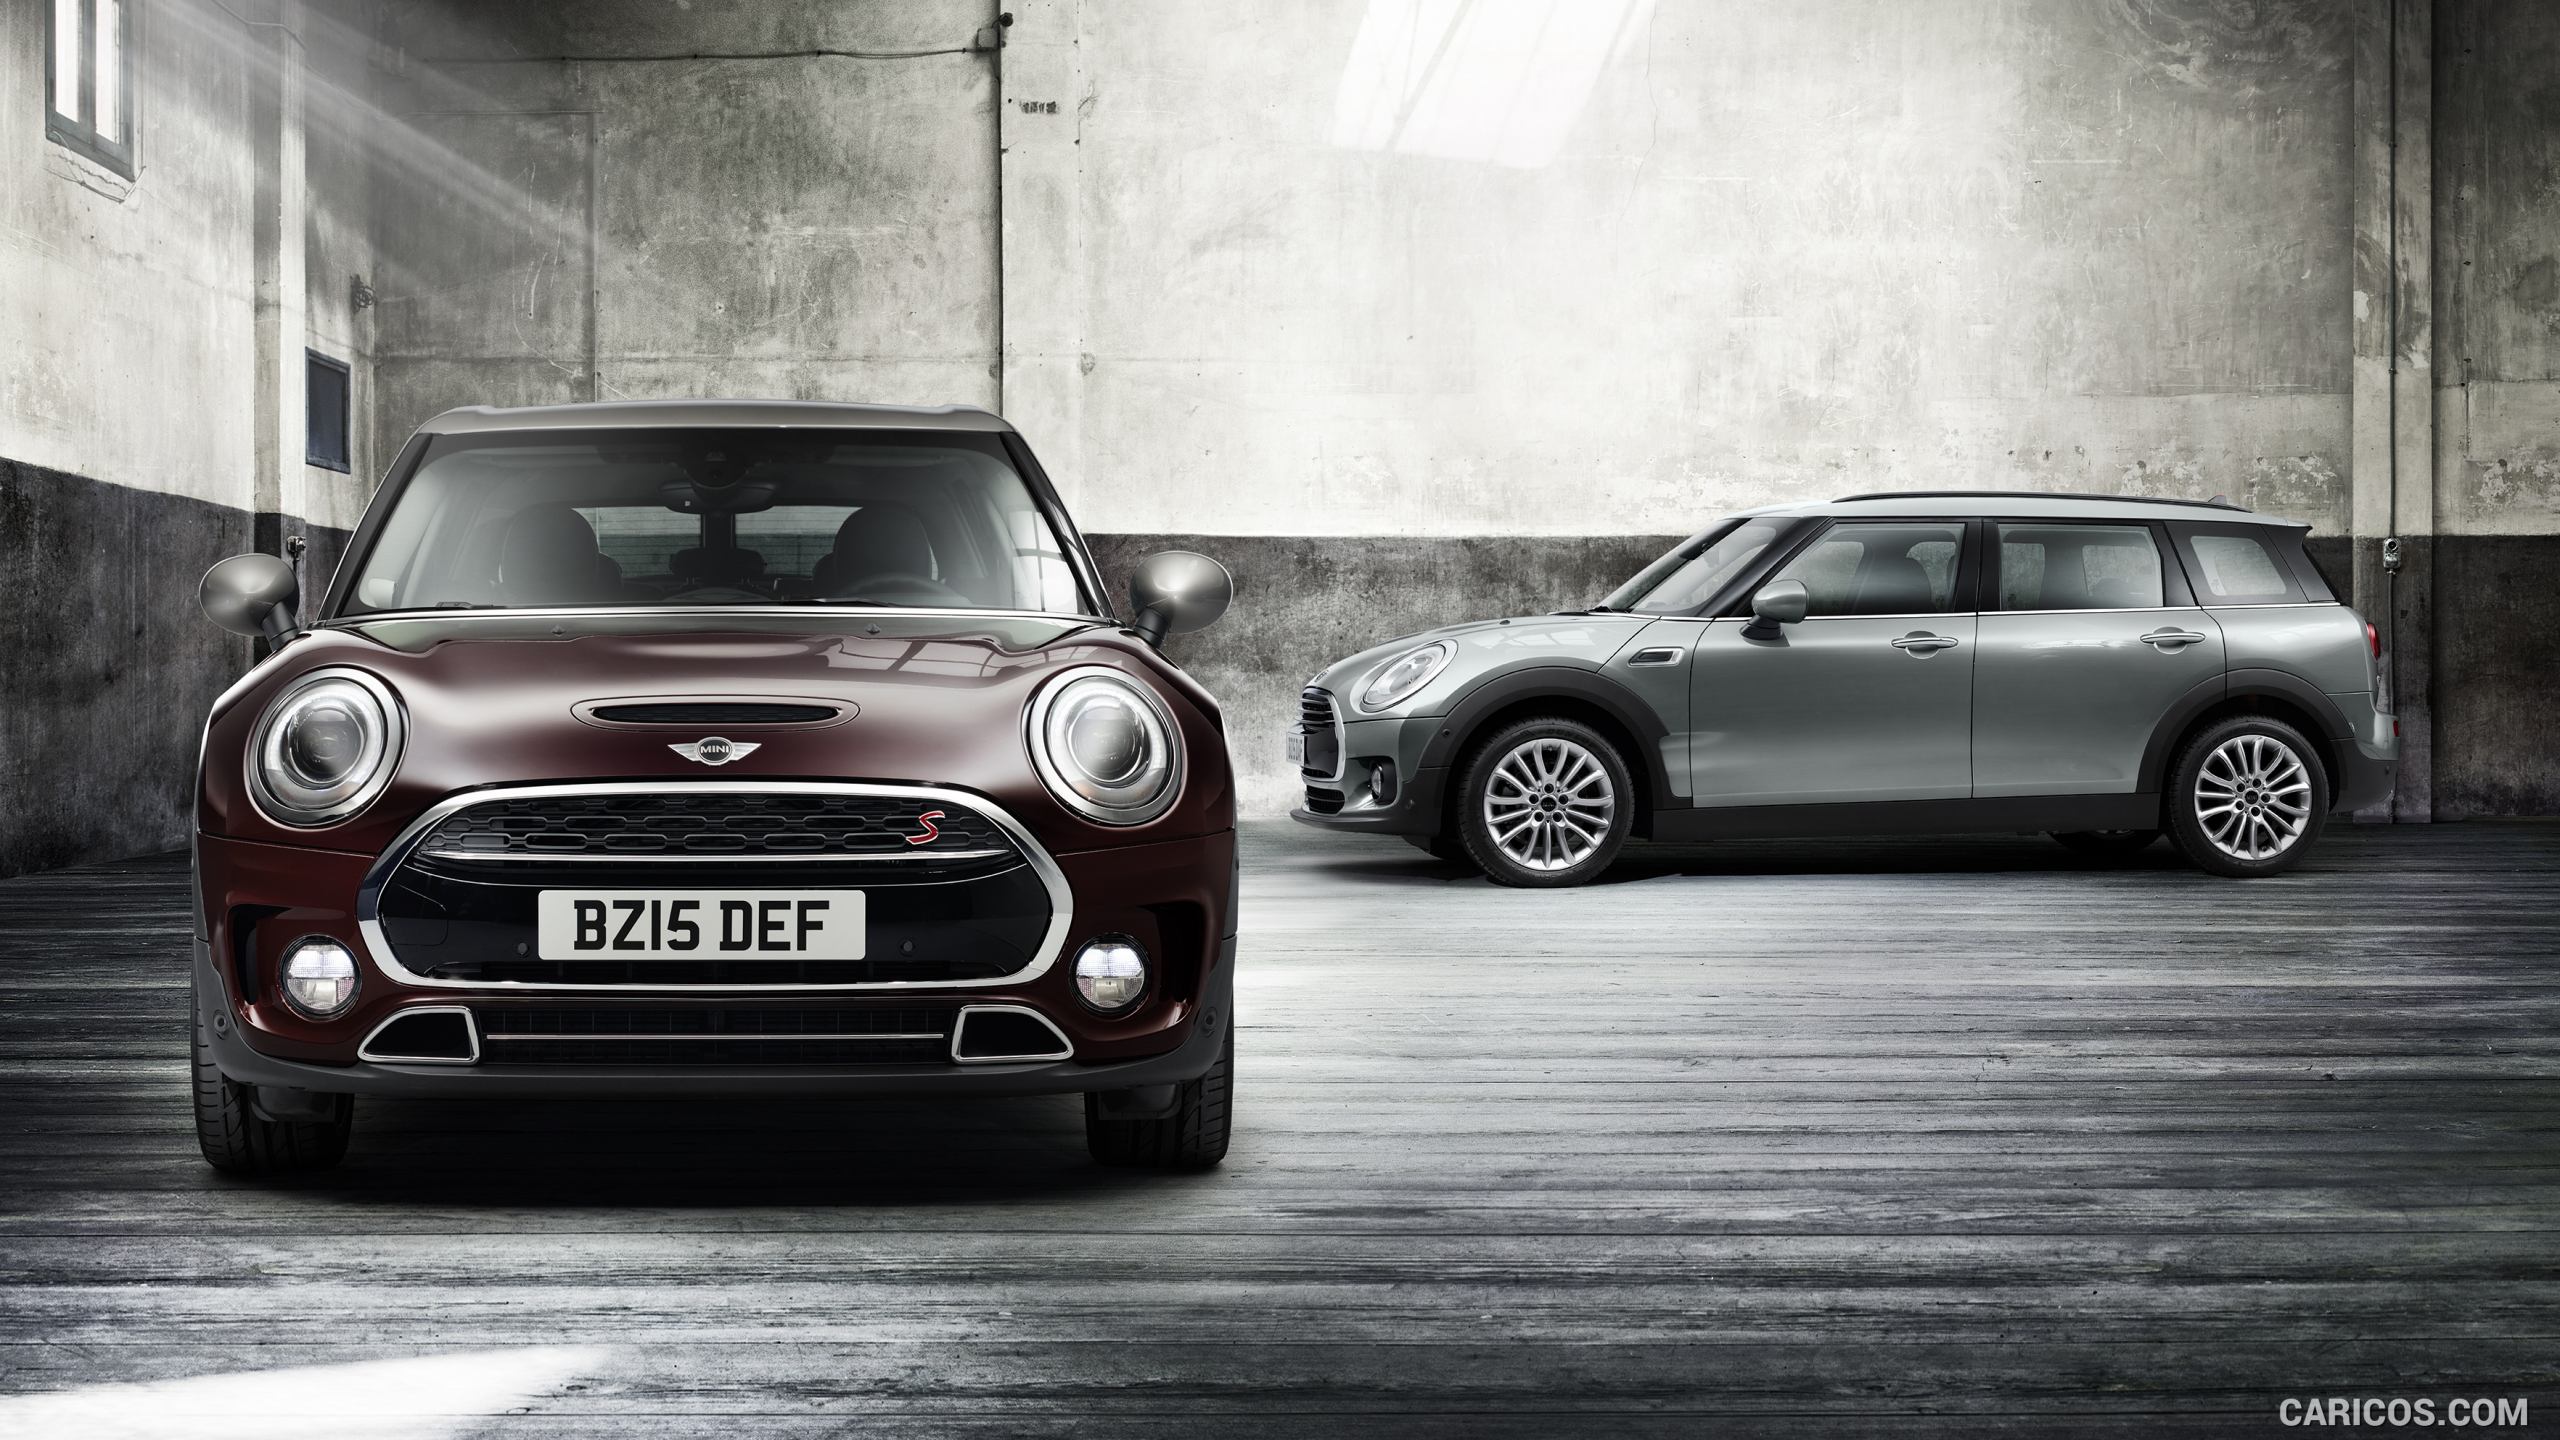 2016 MINI Clubman S and D - Front, #10 of 380